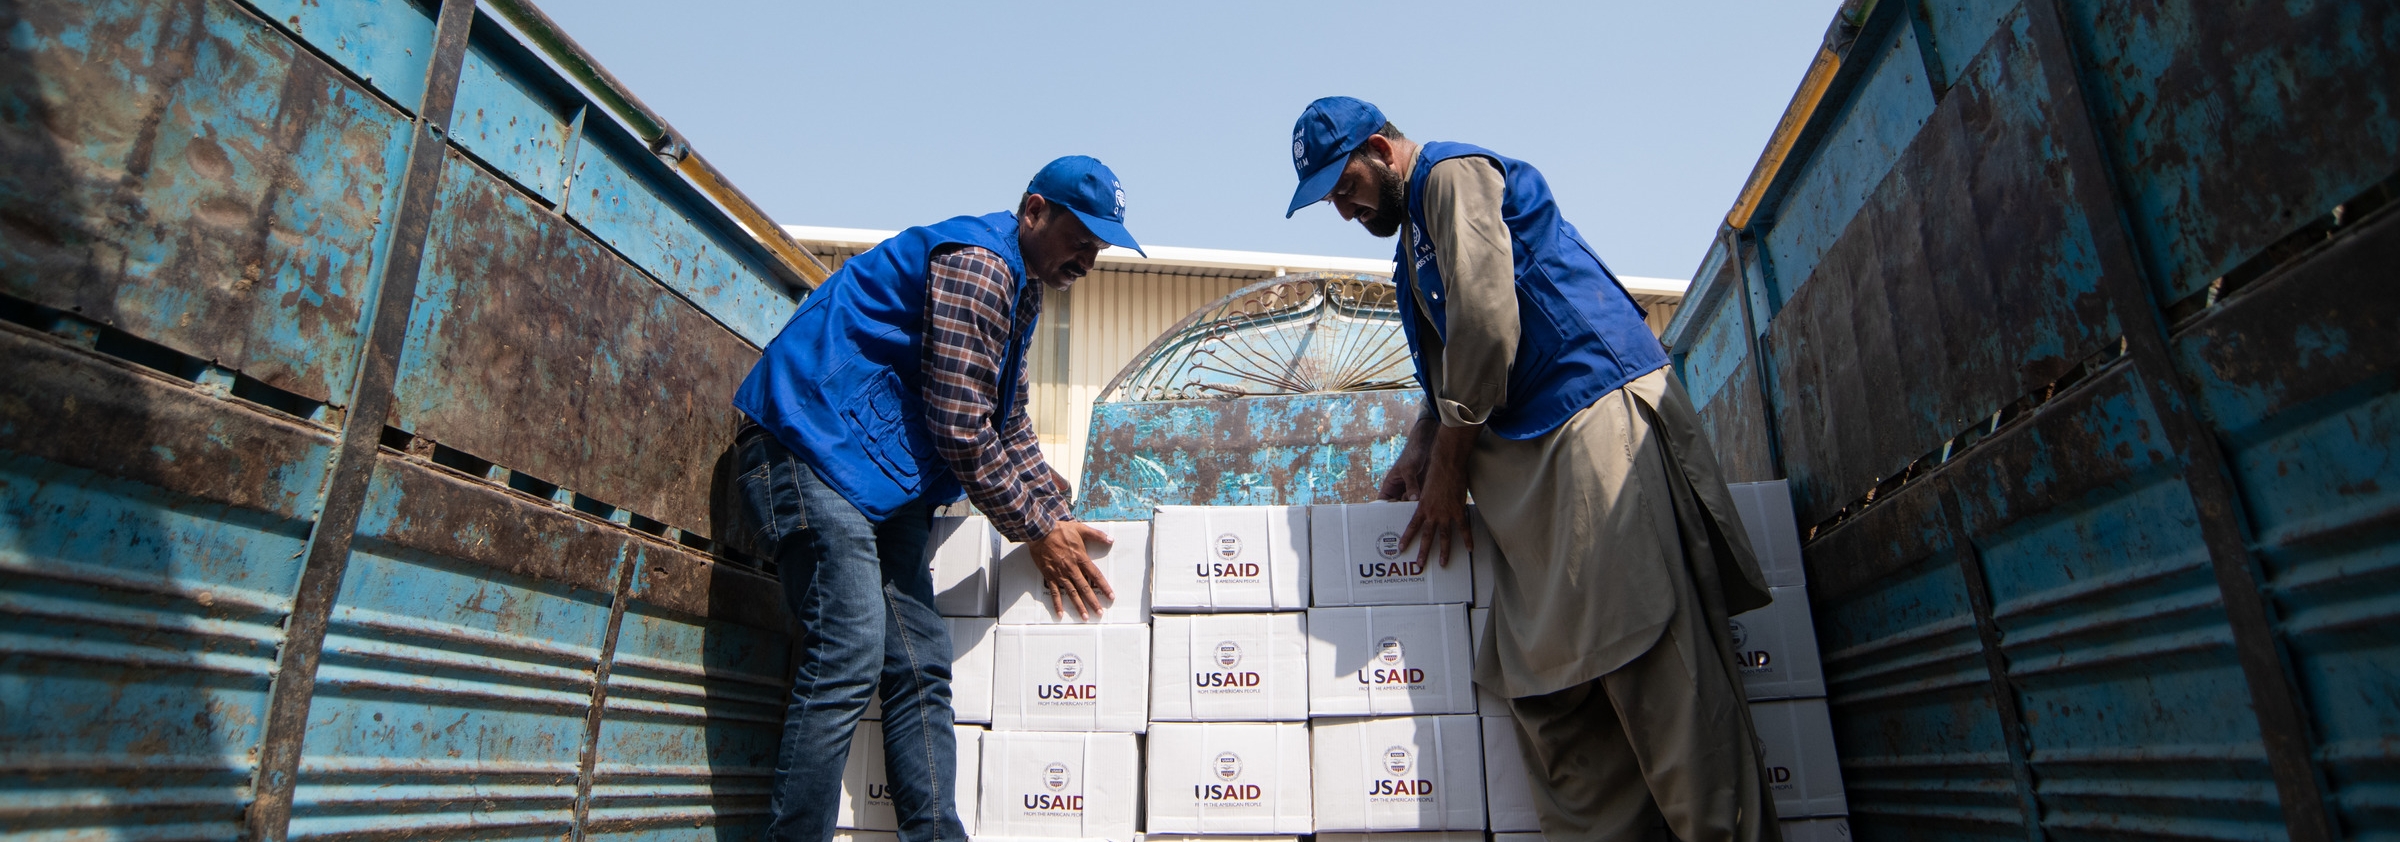 Loading of shelter and NFI kits to respond to the Pakistan floods. © IOM Pakistan 2022.